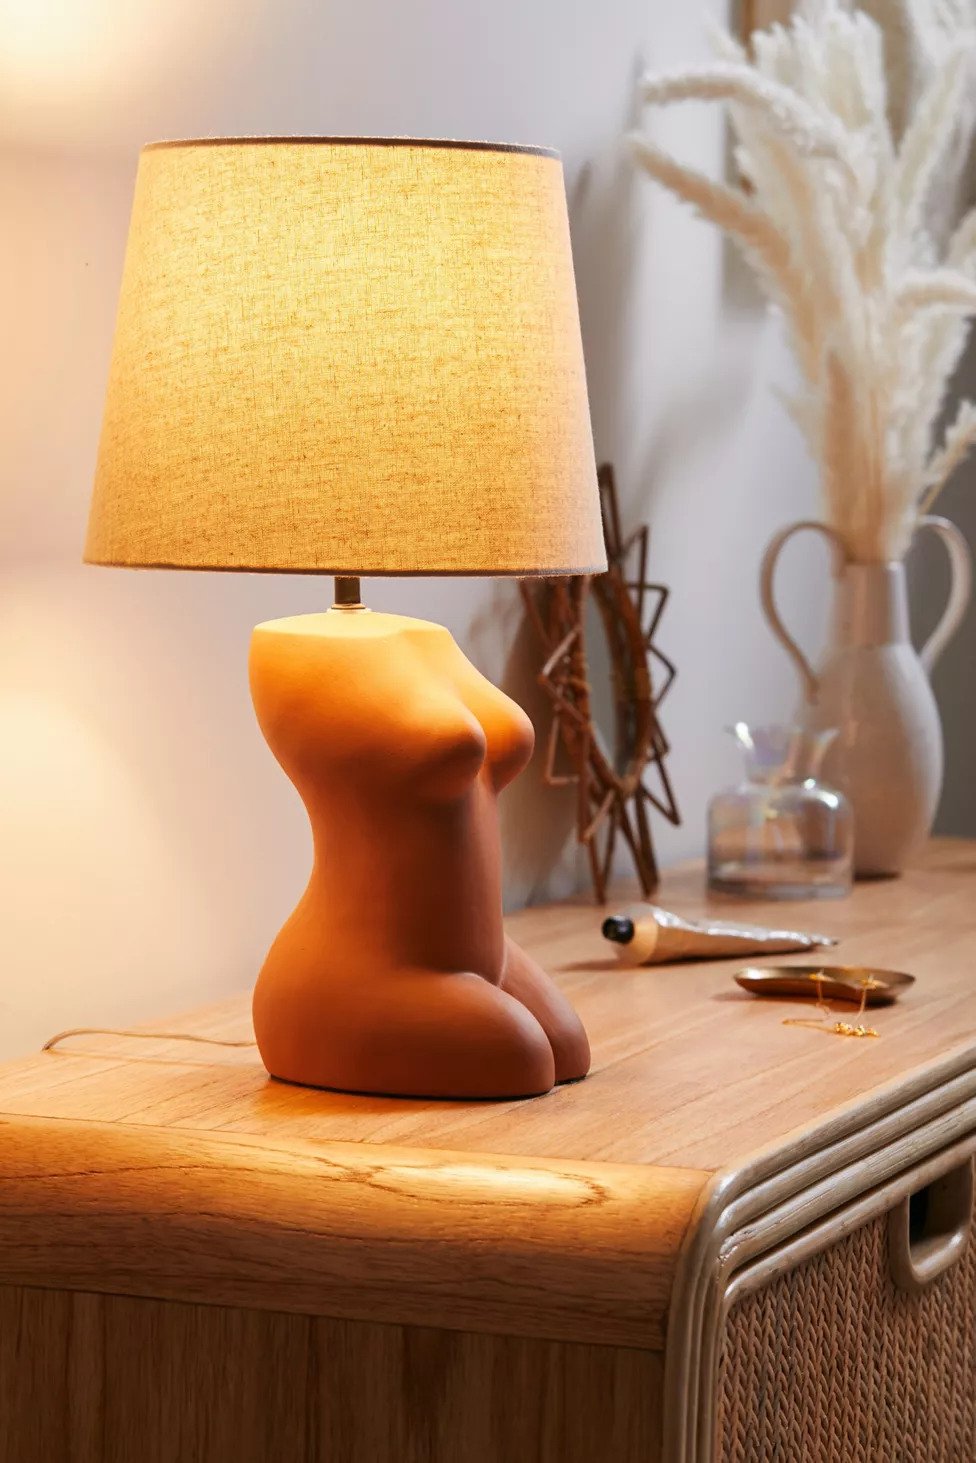 Female Form Table Lamp, $99 @urbanoutfitters.com